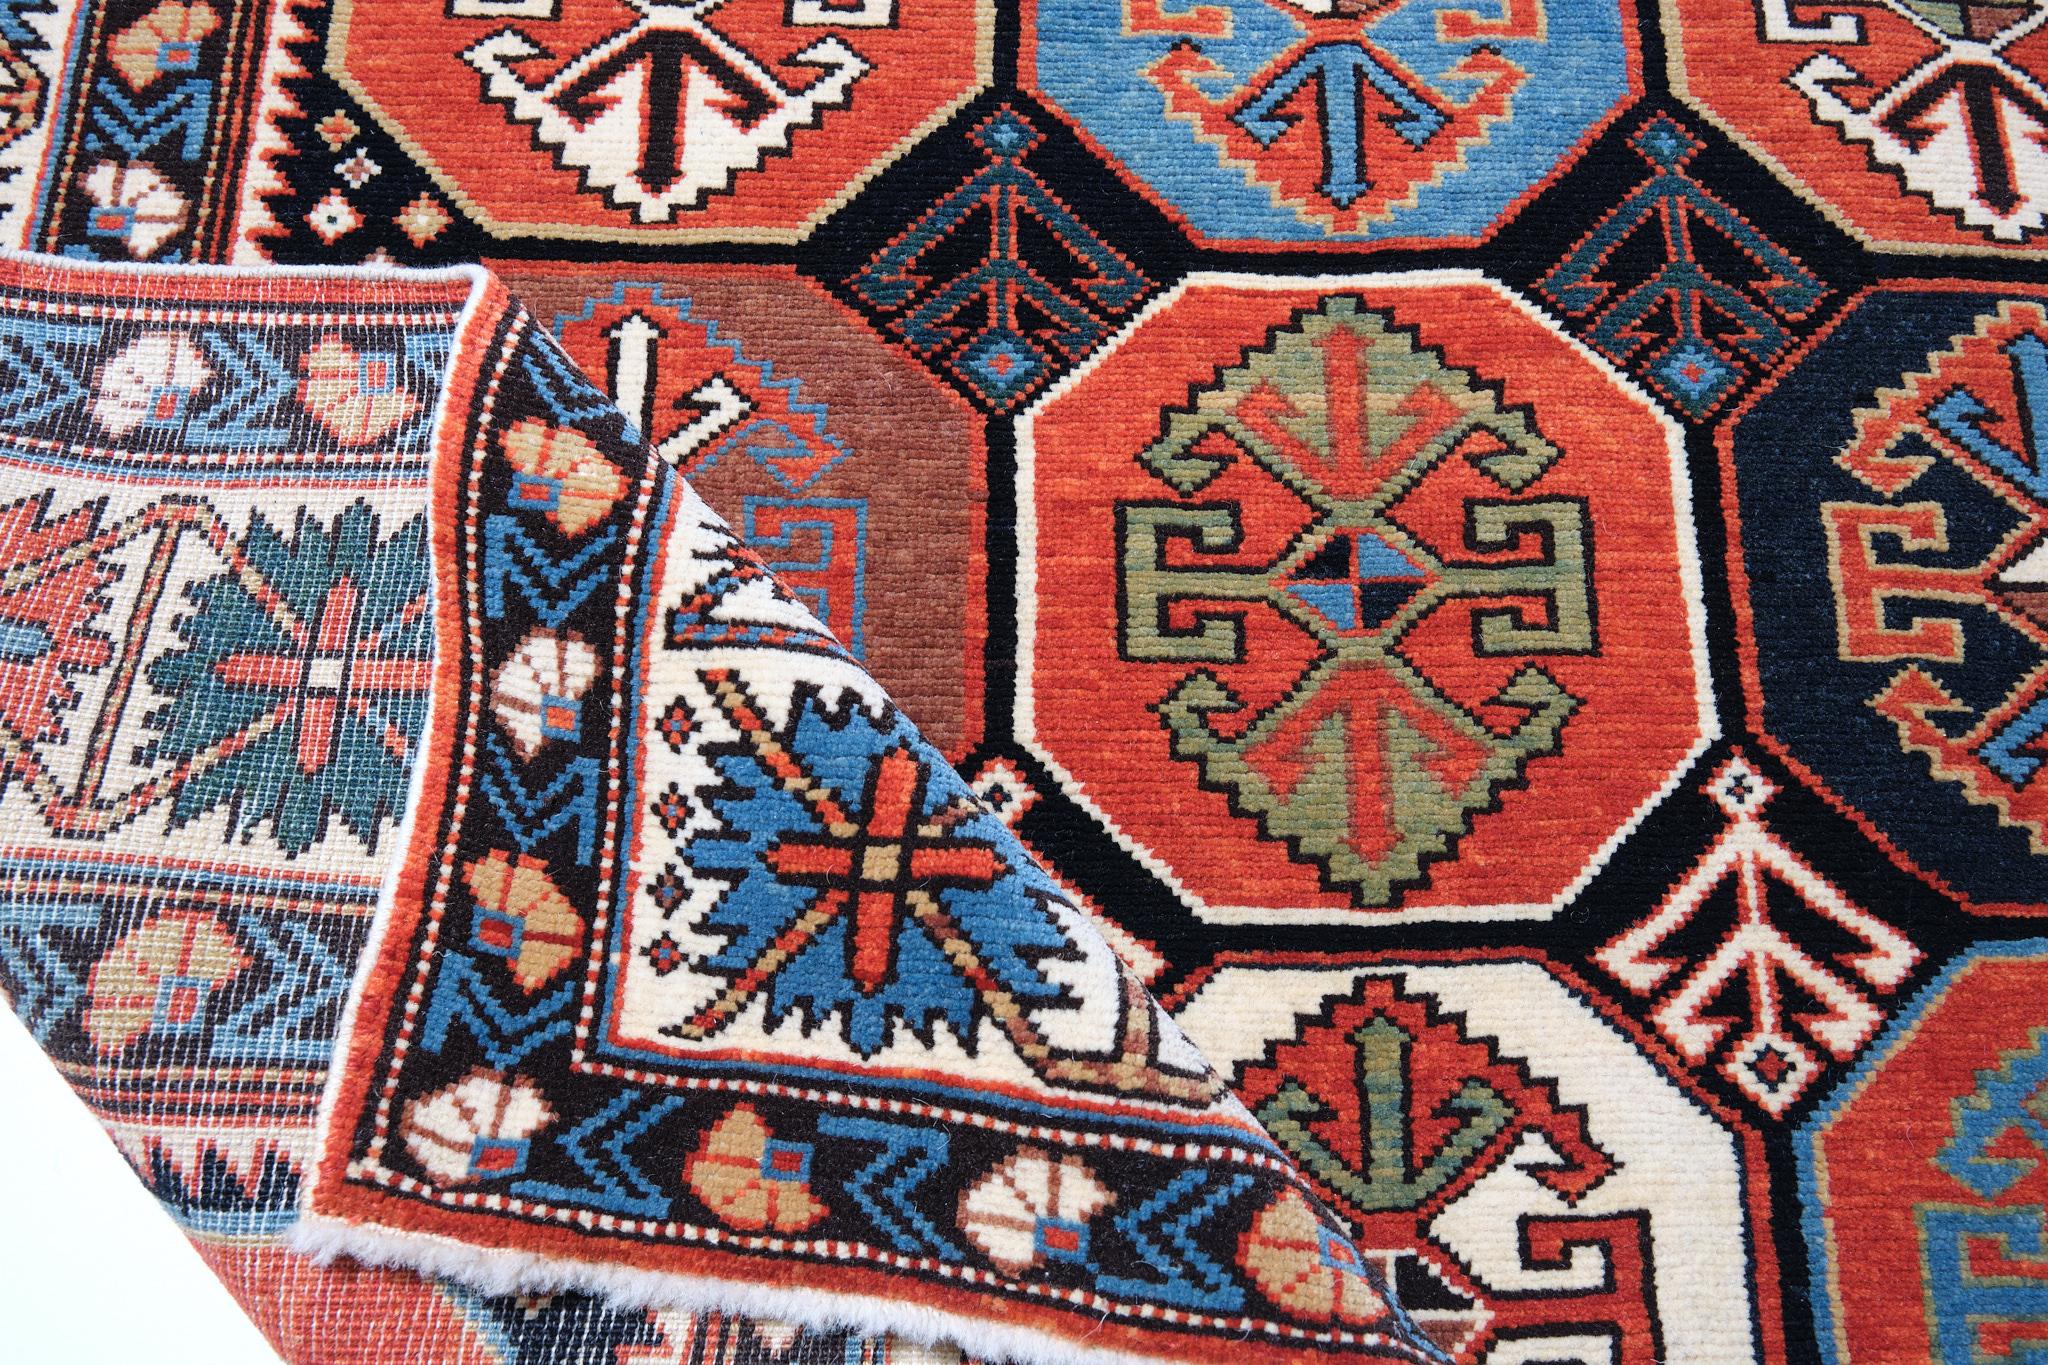 Vegetable Dyed Ararat Rugs Kuba Rug with Octagons Caucasian 19th C. Revival Rug, Natural Dyed For Sale